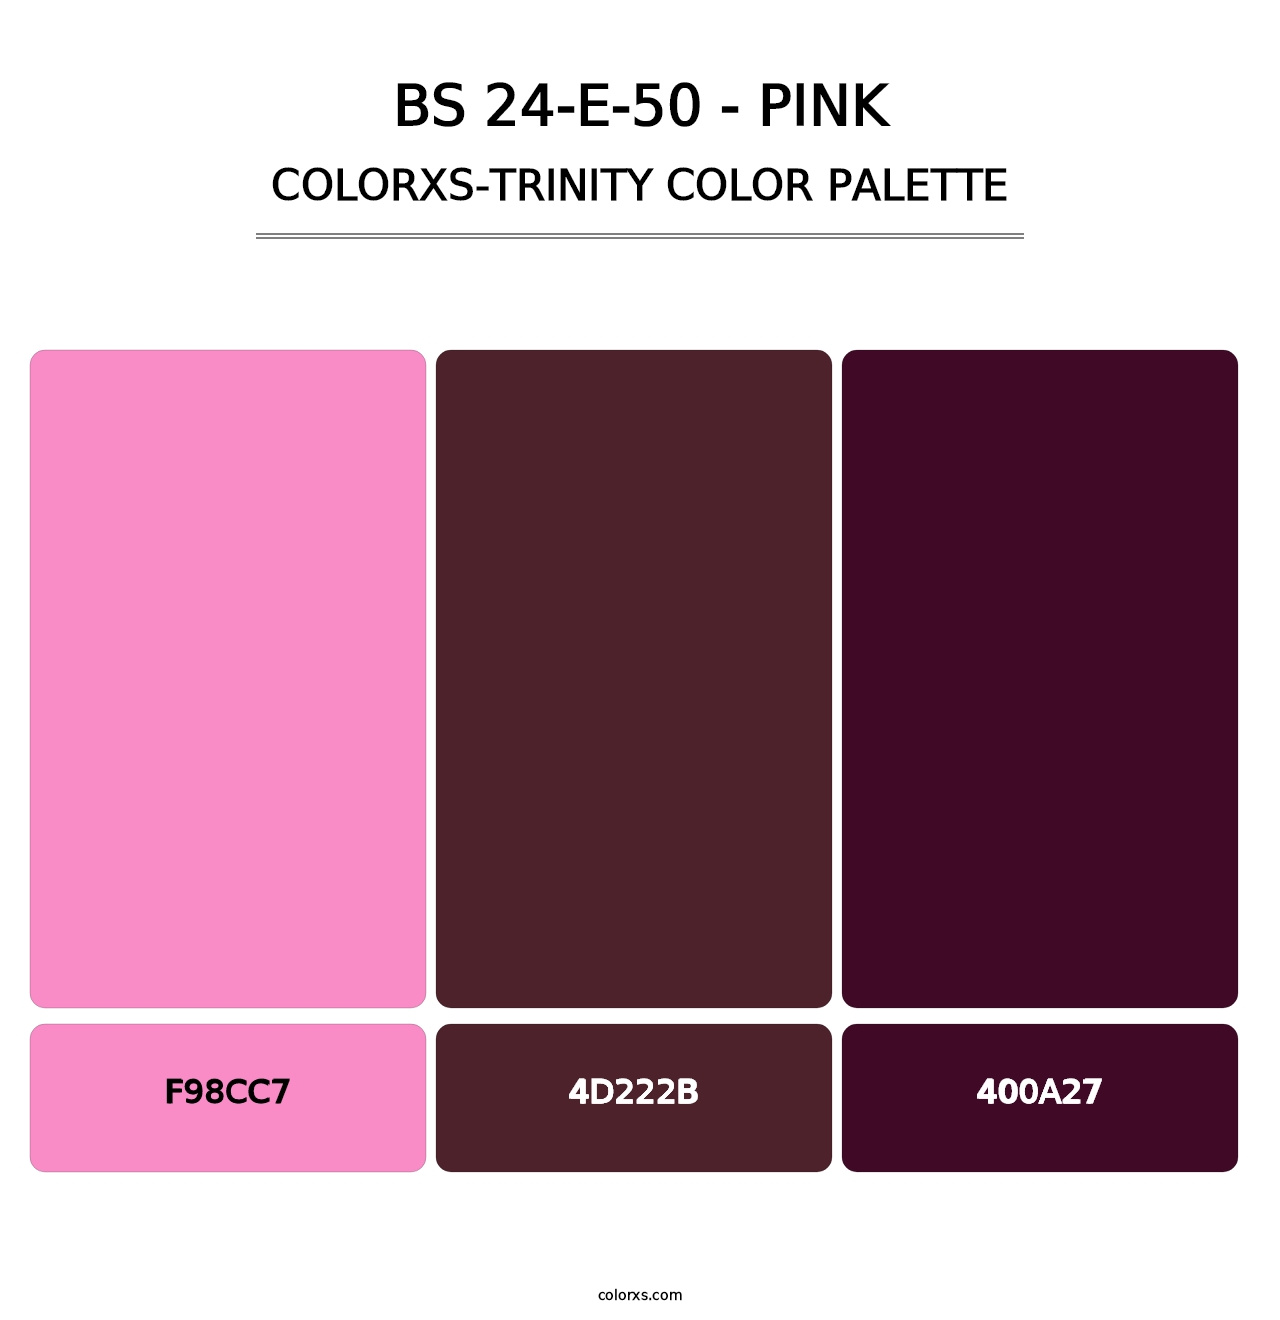 BS 24-E-50 - Pink - Colorxs Trinity Palette